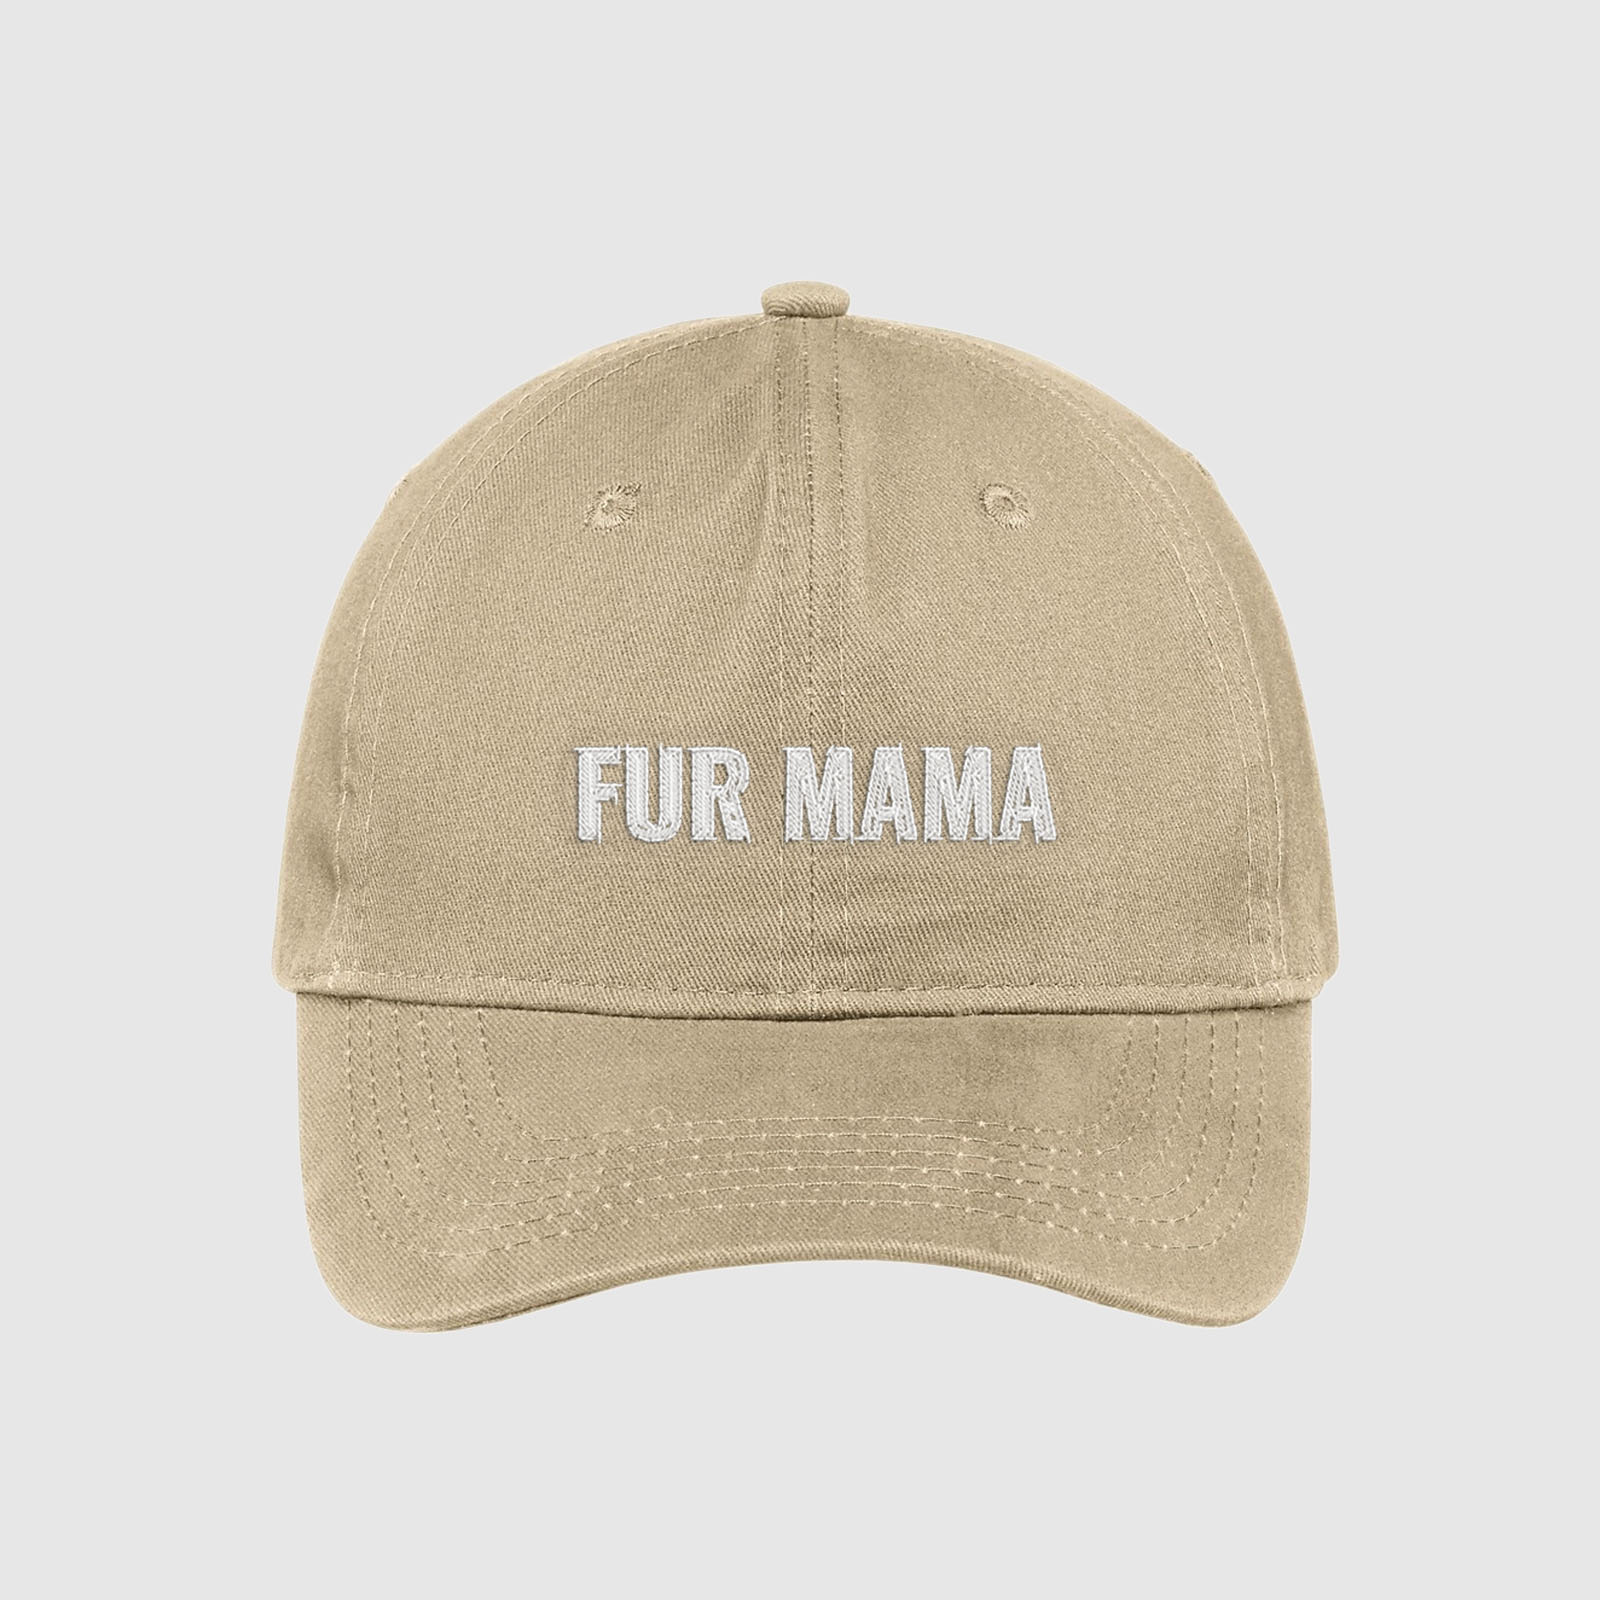 Tan Fur Mama dad Hat for dog moms embroidered with white text.